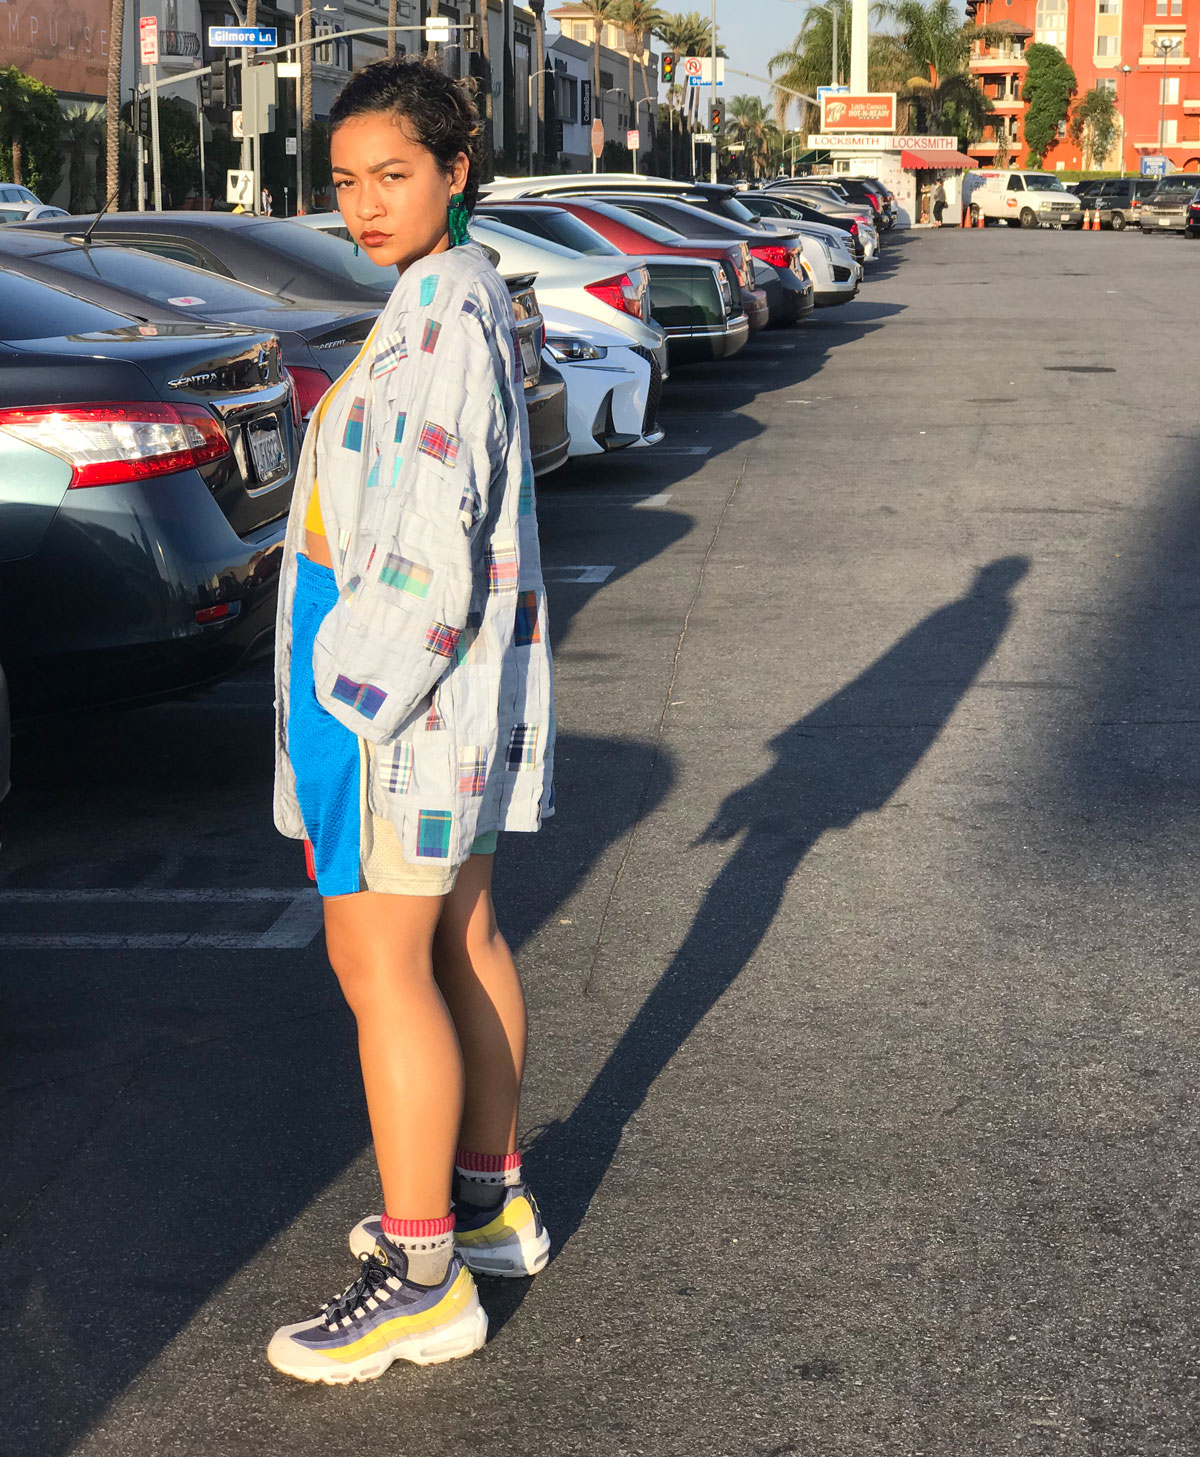 Female student in streetwear poses in parking lot